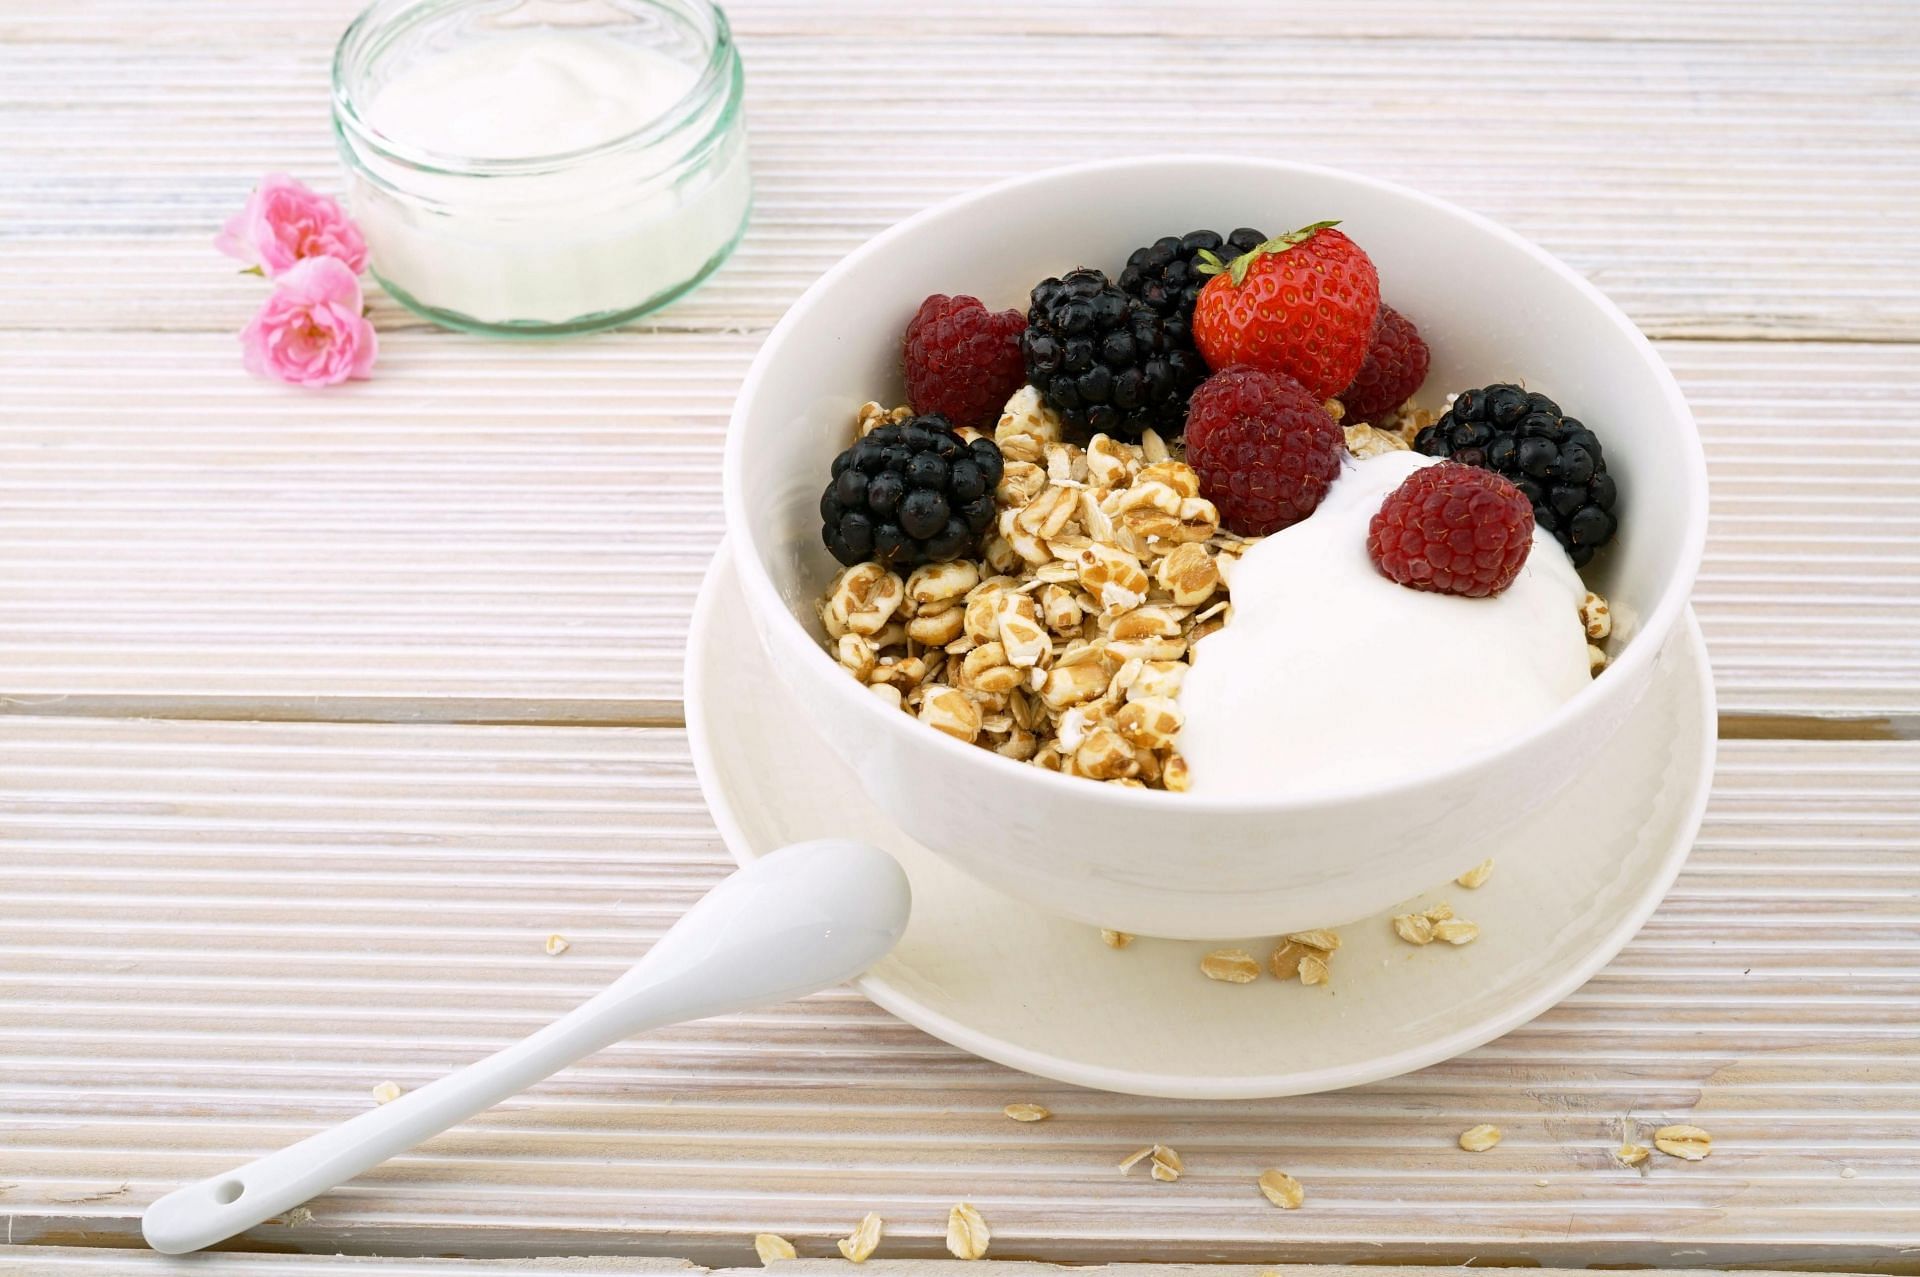 Are overnight oats healthy (image sourced via Pexels / Photo by life of pix)